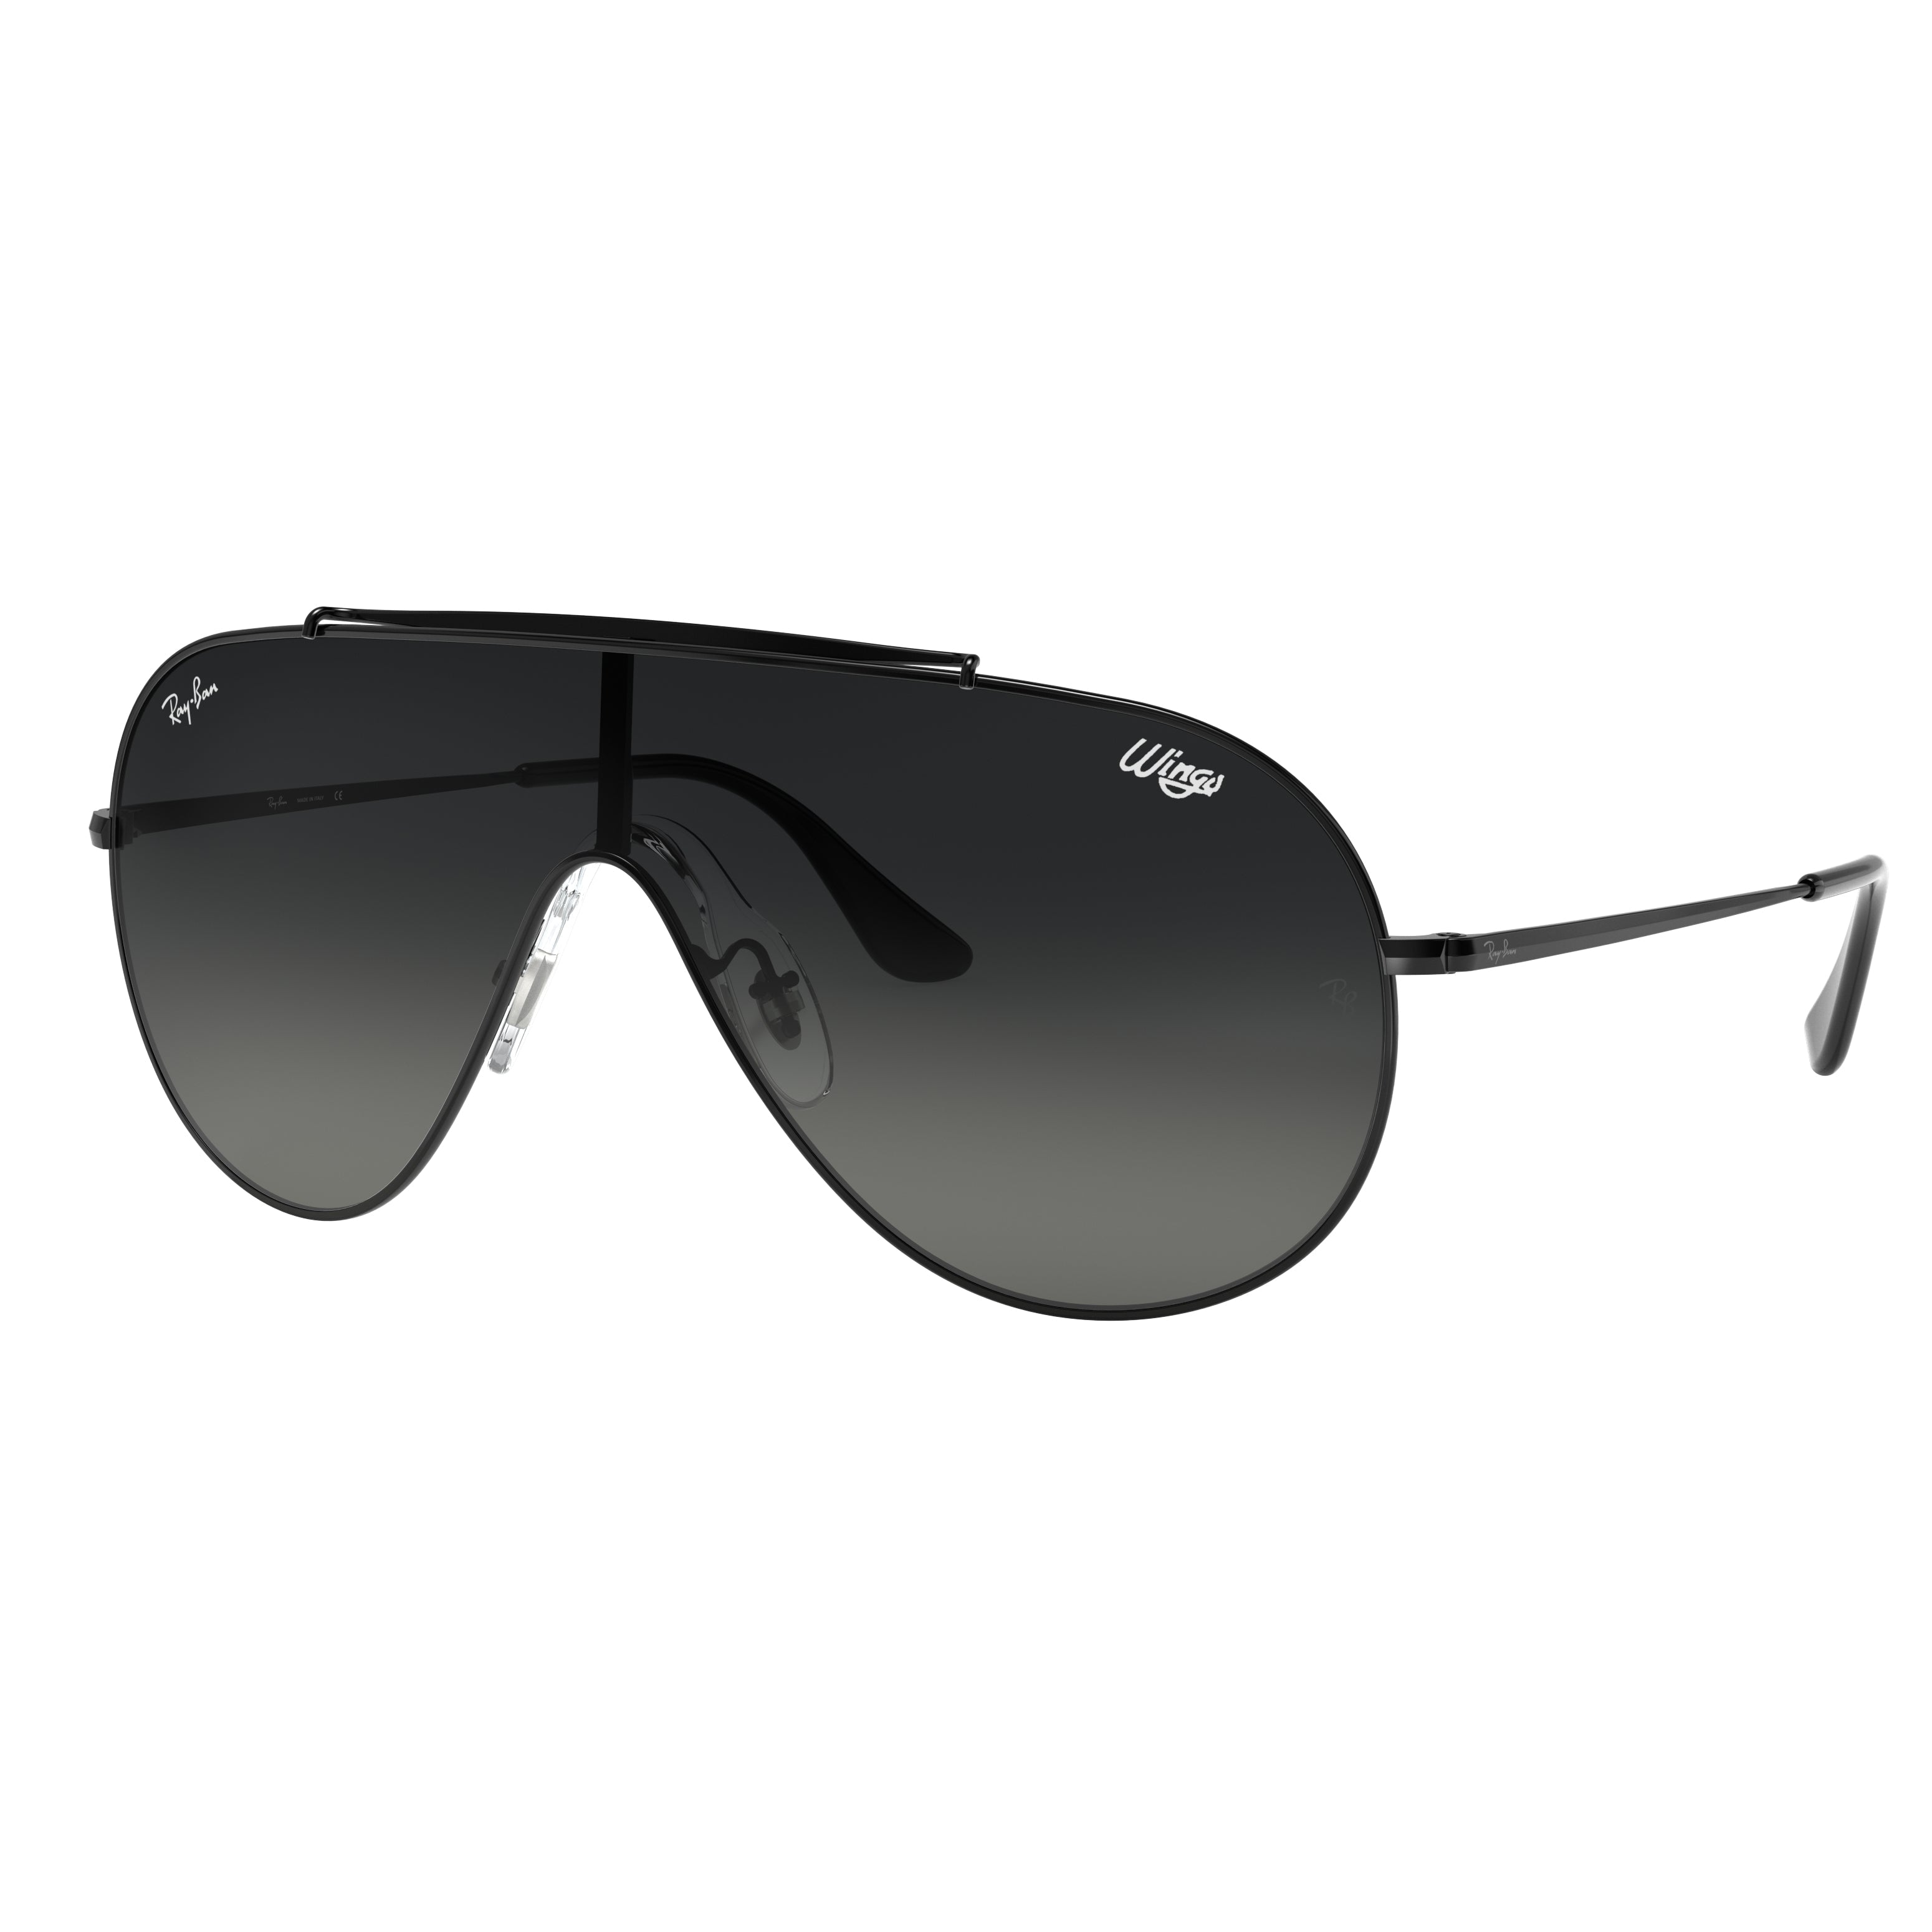 Ray-Ban Ray-Ban Wings Grey Gradient Pilot Unisex Sunglasses RB3597 002/11 33